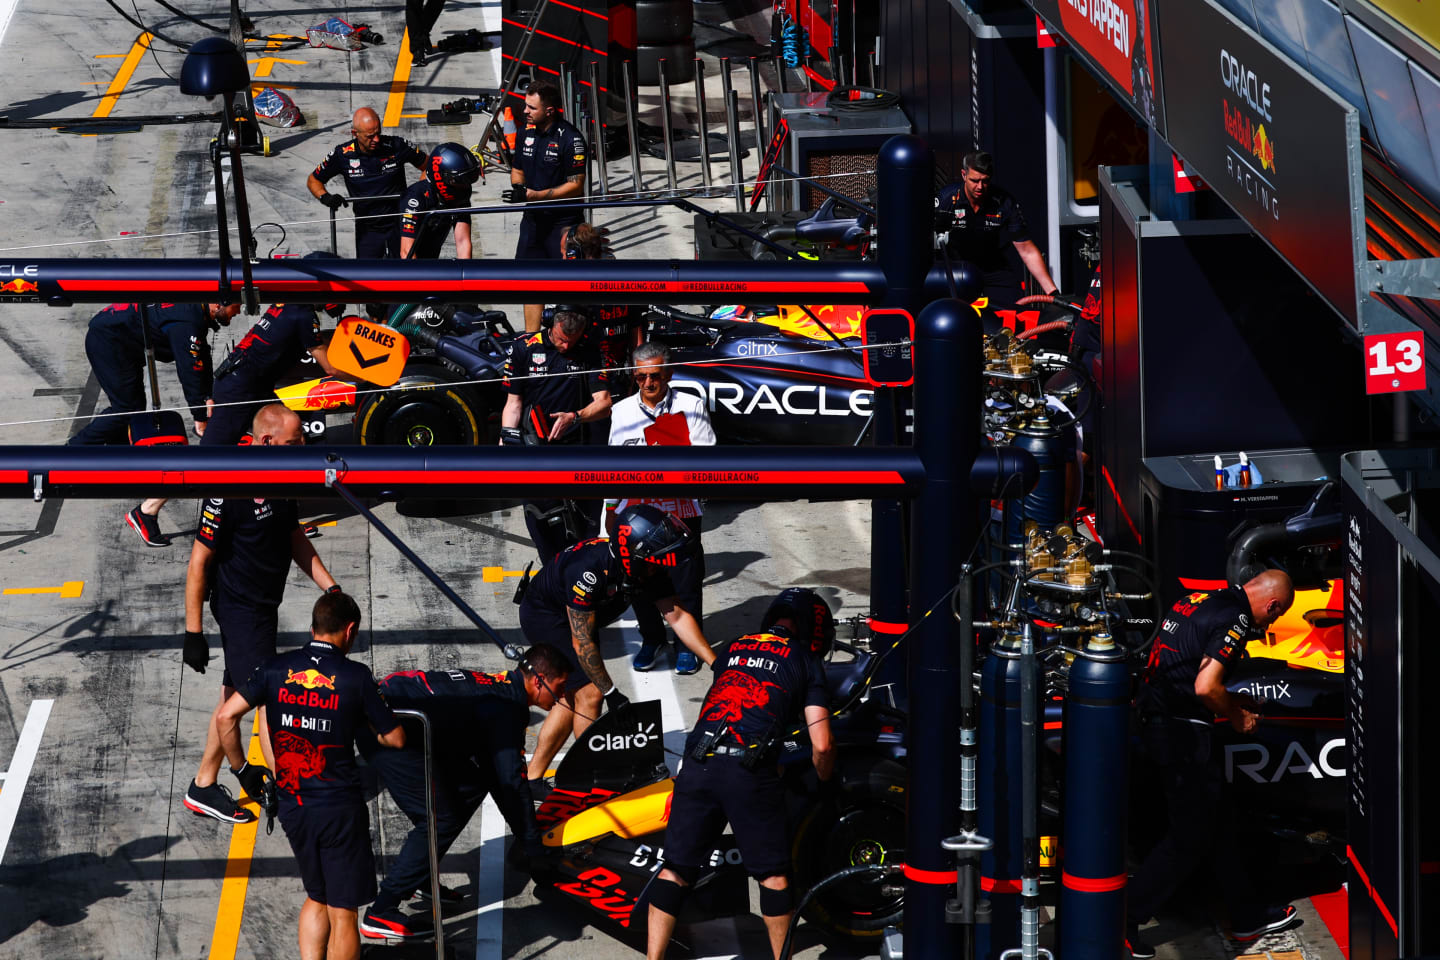 MONZA, ITALY - SEPTEMBER 09: The Red Bull Racing team work in the Pitlane during practice ahead of the F1 Grand Prix of Italy at Autodromo Nazionale Monza on September 09, 2022 in Monza, Italy. (Photo by Mark Thompson/Getty Images)